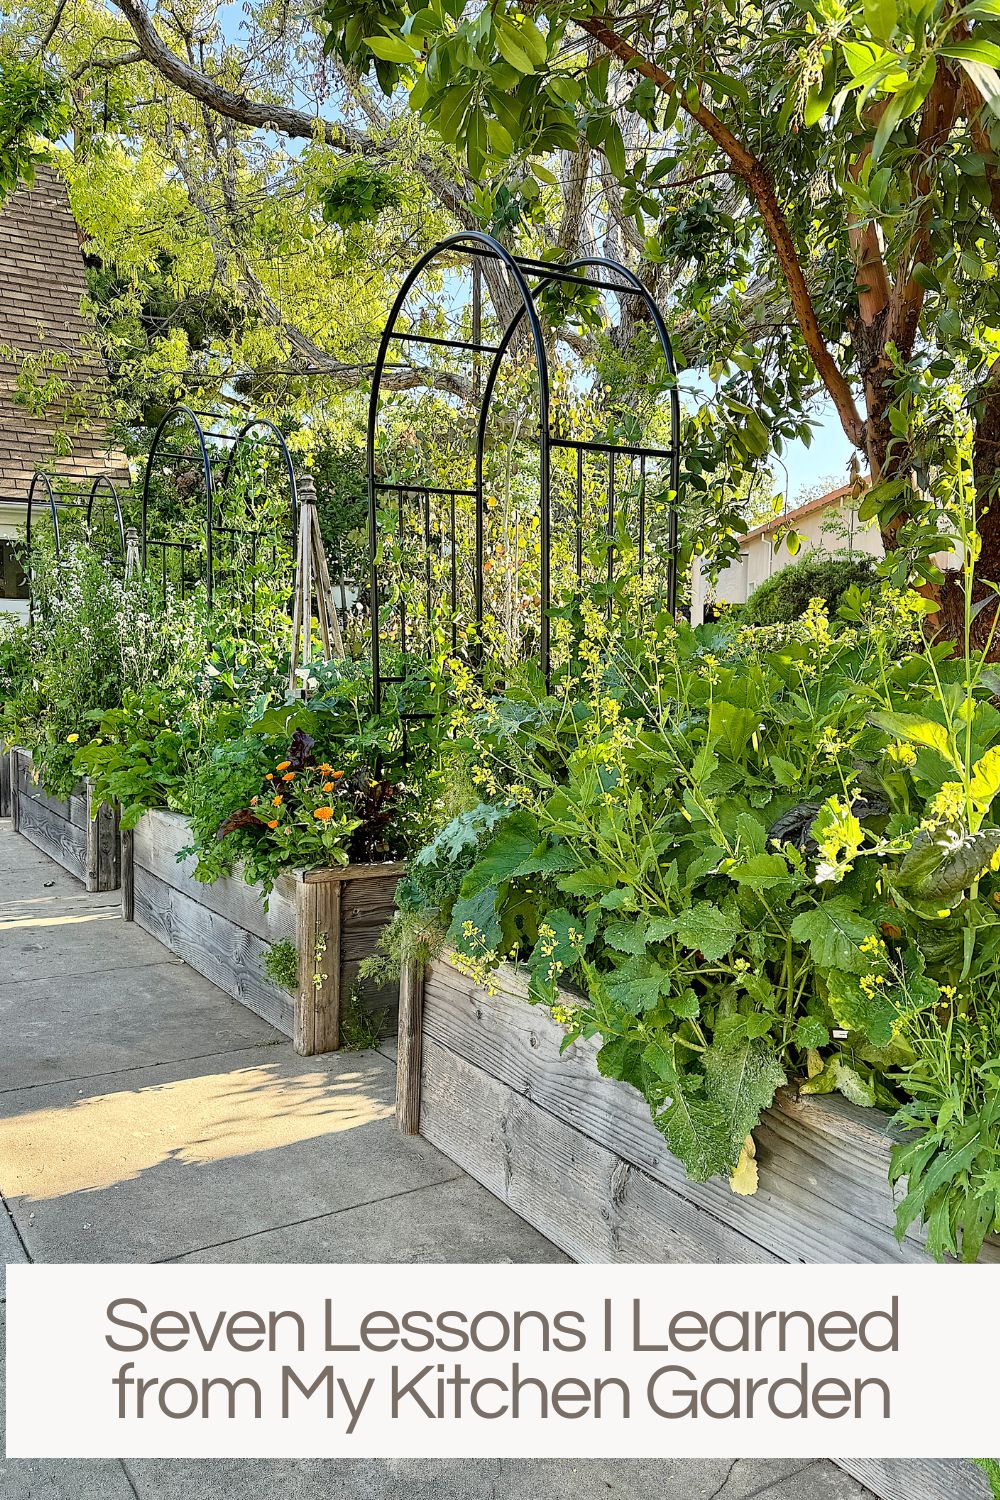 Two months ago, I embarked on a journey to plant a kitchen garden by taking an online class with Nicole at Gardenary and I have learned so much!